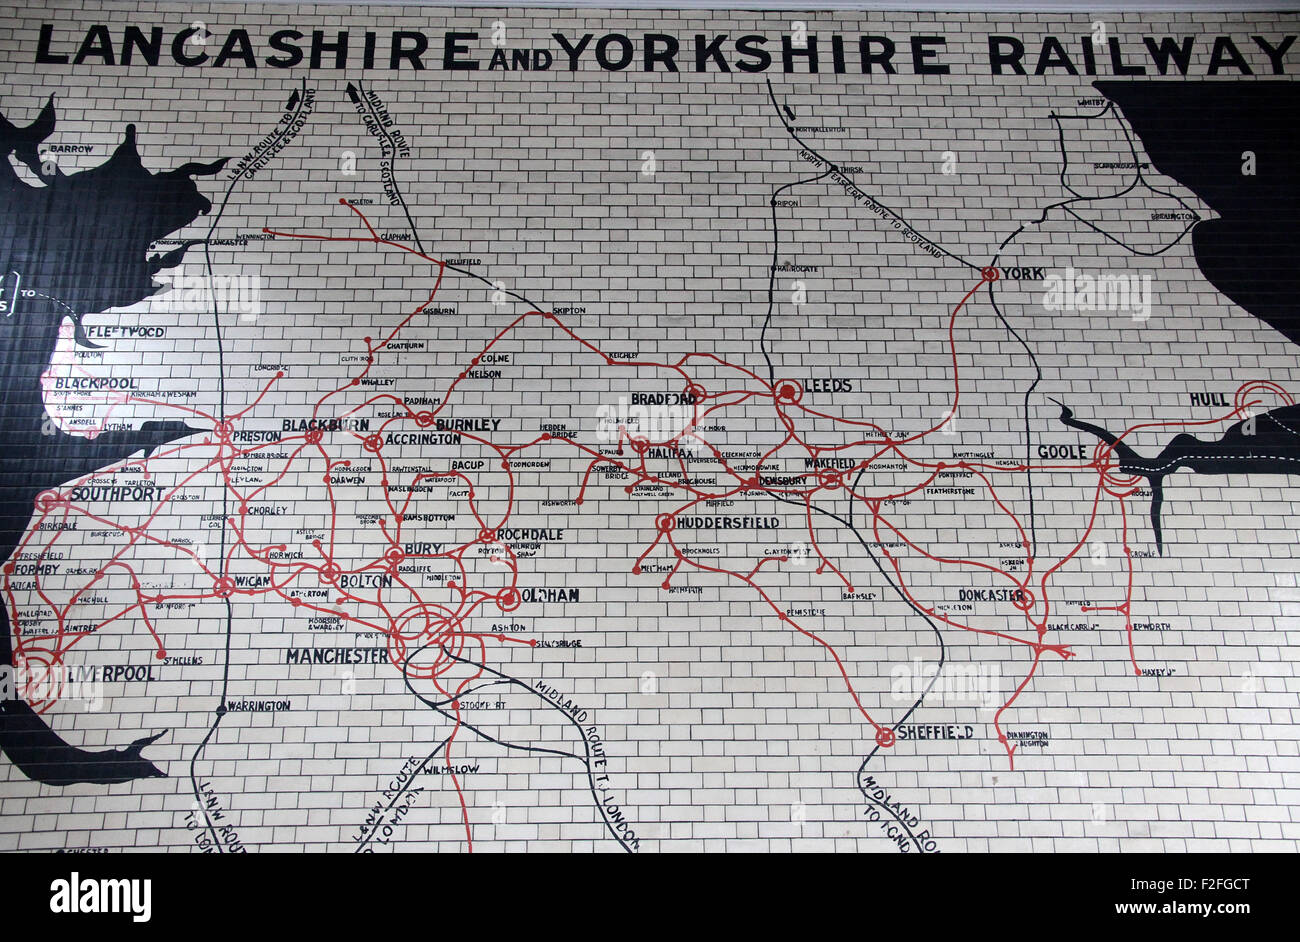 Historic tiled Lancashire and Yorkshire railway route map at Victoria Station in Manchester Stock Photo